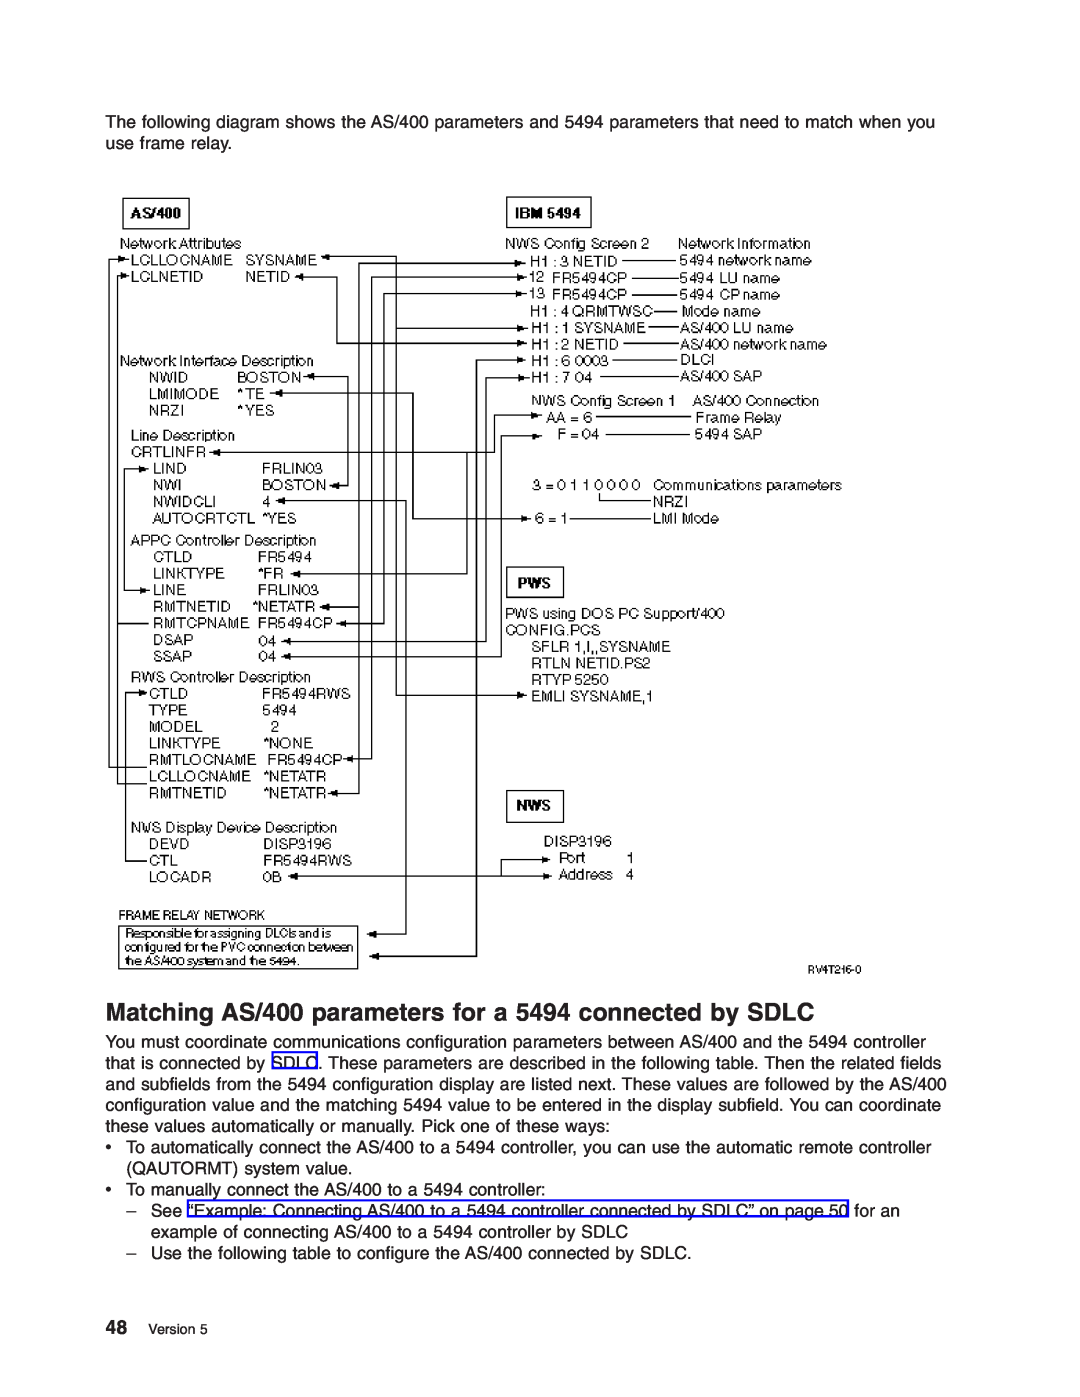 IBM manual Matching AS/400 parameters for a 5494 connected by SDLC, Version 